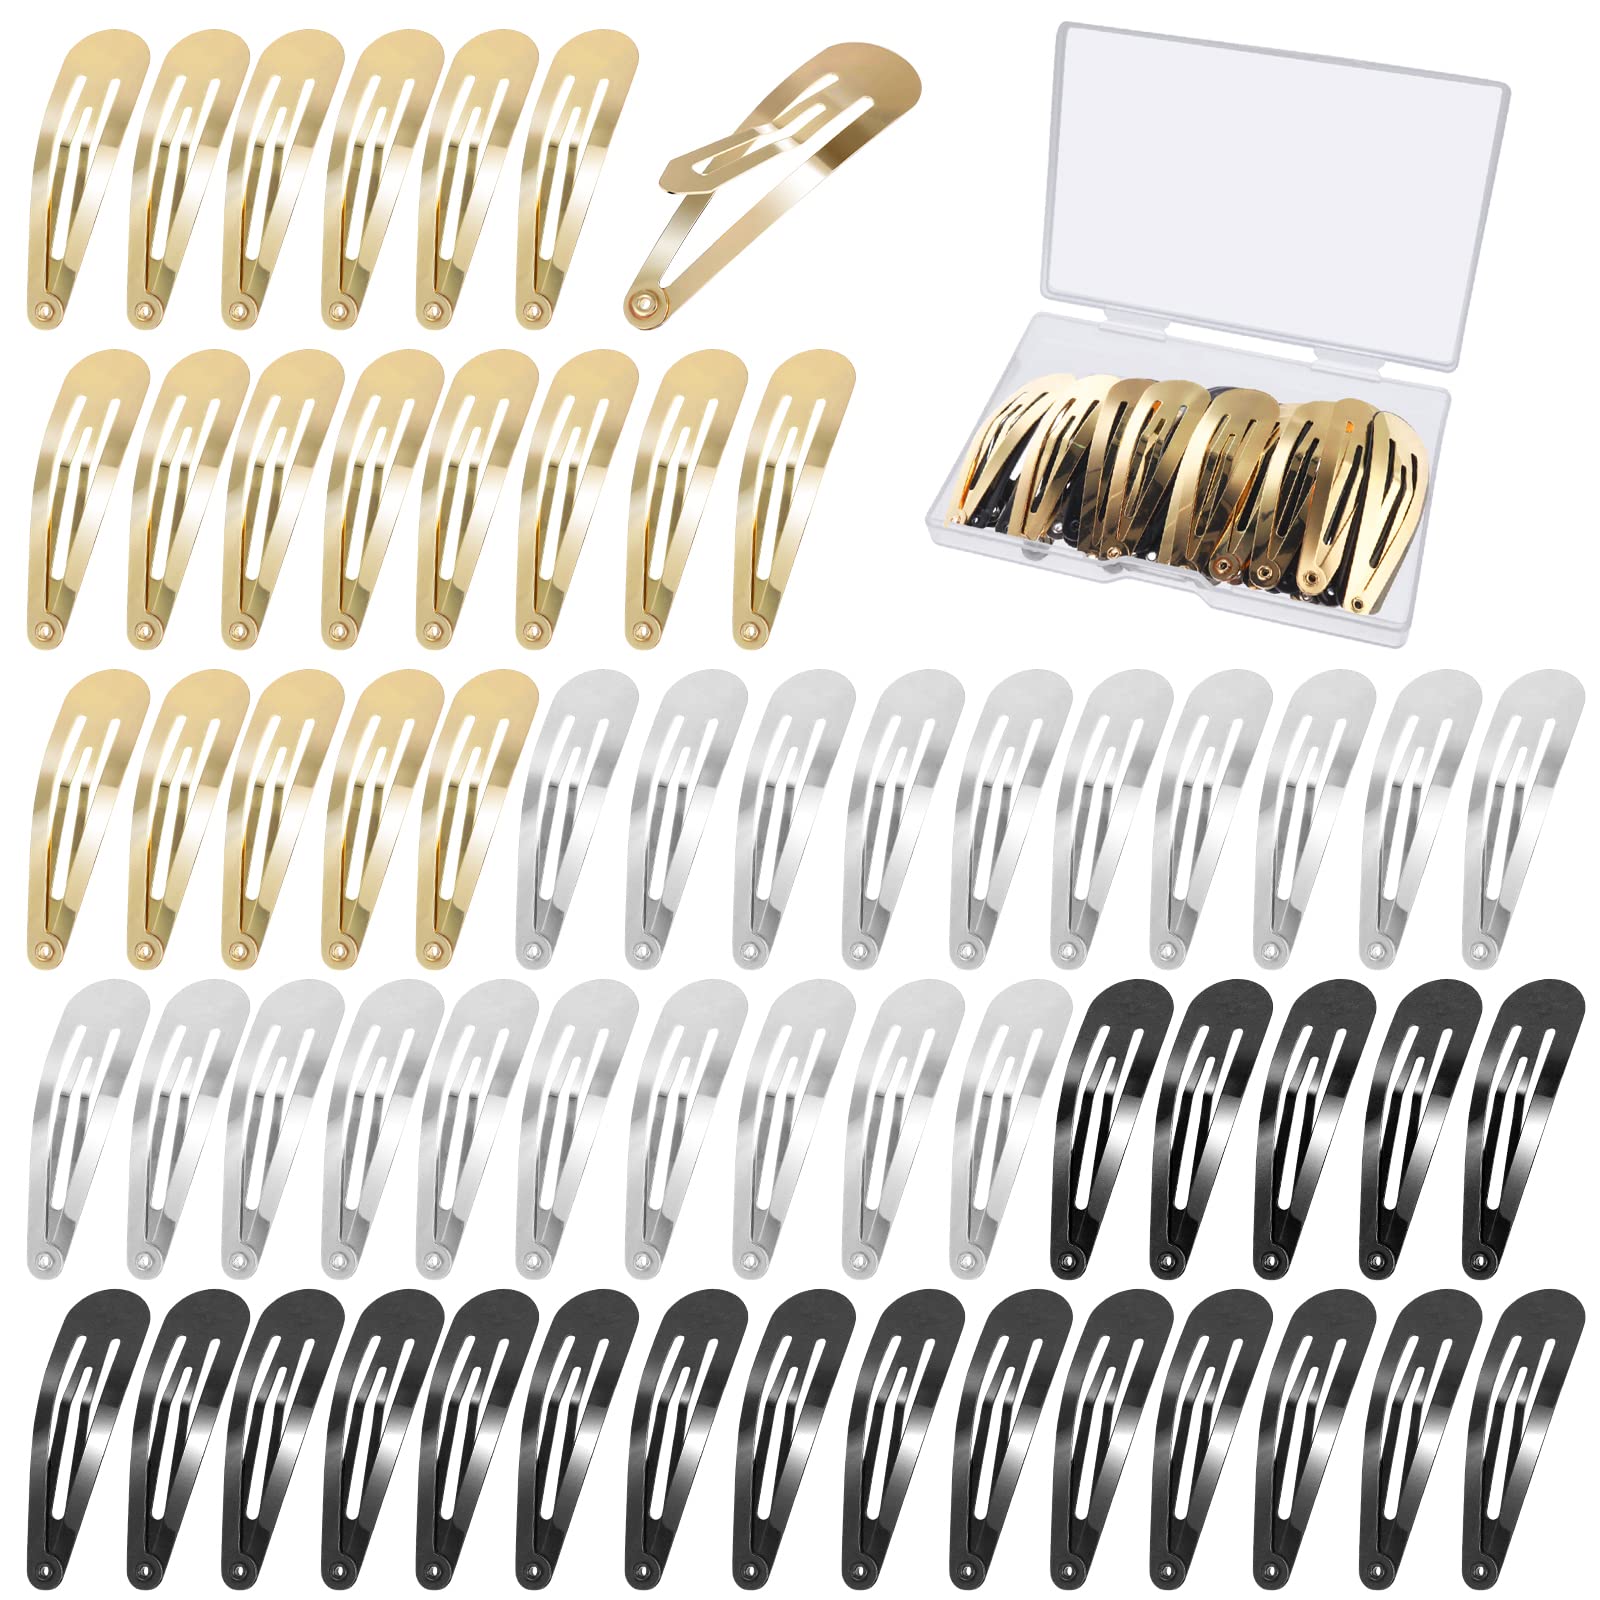 Lusofie 60Pcs Hair Snap Clips 2 Inch Metal Hair Barrettes Snap Hair Clips  Simple Snap Barrettes for Women Girls with Storage Box(Gold Silver Black)